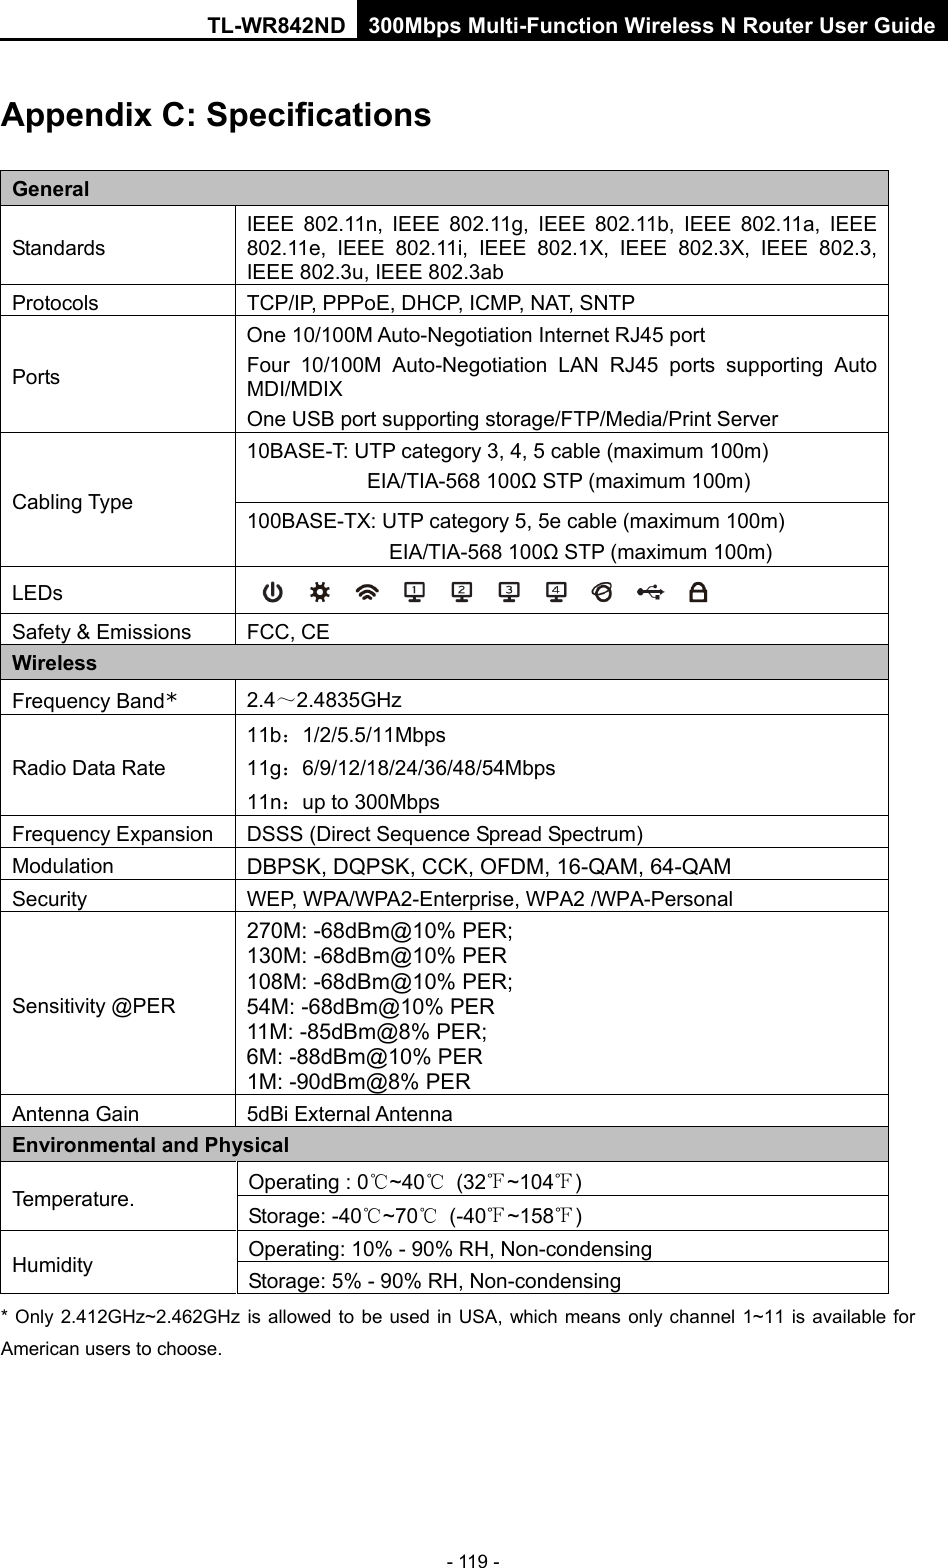 TL-WR842ND 300Mbps Multi-Function Wireless N Router User Guide  - 119 - Appendix C: Specifications General Standards IEEE 802.11n,  IEEE 802.11g,  IEEE 802.11b,  IEEE 802.11a,  IEEE 802.11e,  IEEE 802.11i,  IEEE 802.1X,  IEEE 802.3X,  IEEE 802.3, IEEE 802.3u, IEEE 802.3ab Protocols TCP/IP, PPPoE, DHCP, ICMP, NAT, SNTP Ports One 10/100M Auto-Negotiation Internet RJ45 port   Four 10/100M Auto-Negotiation LAN RJ45 ports supporting Auto MDI/MDIX One USB port supporting storage/FTP/Media/Print Server Cabling Type 10BASE-T: UTP category 3, 4, 5 cable (maximum 100m) EIA/TIA-568 100Ω STP (maximum 100m) 100BASE-TX: UTP category 5, 5e cable (maximum 100m) EIA/TIA-568 100Ω STP (maximum 100m) LEDs  Safety &amp; Emissions FCC, CE Wireless Frequency Band* 2.4～2.4835GHz Radio Data Rate 11b：1/2/5.5/11Mbps 11g：6/9/12/18/24/36/48/54Mbps 11n：up to 300Mbps Frequency Expansion DSSS (Direct Sequence Spread Spectrum) Modulation DBPSK, DQPSK, CCK, OFDM, 16-QAM, 64-QAM Security WEP, WPA/WPA2-Enterprise, WPA2 /WPA-Personal Sensitivity @PER 270M: -68dBm@10% PER; 130M: -68dBm@10% PER 108M: -68dBm@10% PER;   54M: -68dBm@10% PER 11M: -85dBm@8% PER;   6M: -88dBm@10% PER 1M: -90dBm@8% PER Antenna Gain 5dBi External Antenna Environmental and Physical Temperature. Operating : 0℃~40℃ (32℉~104℉) Storage: -40℃~70℃  (-40℉~158℉) Humidity Operating: 10% - 90% RH, Non-condensing Storage: 5% - 90% RH, Non-condensing * Only 2.412GHz~2.462GHz is allowed to be used in USA, which means only channel 1~11 is available for American users to choose. 